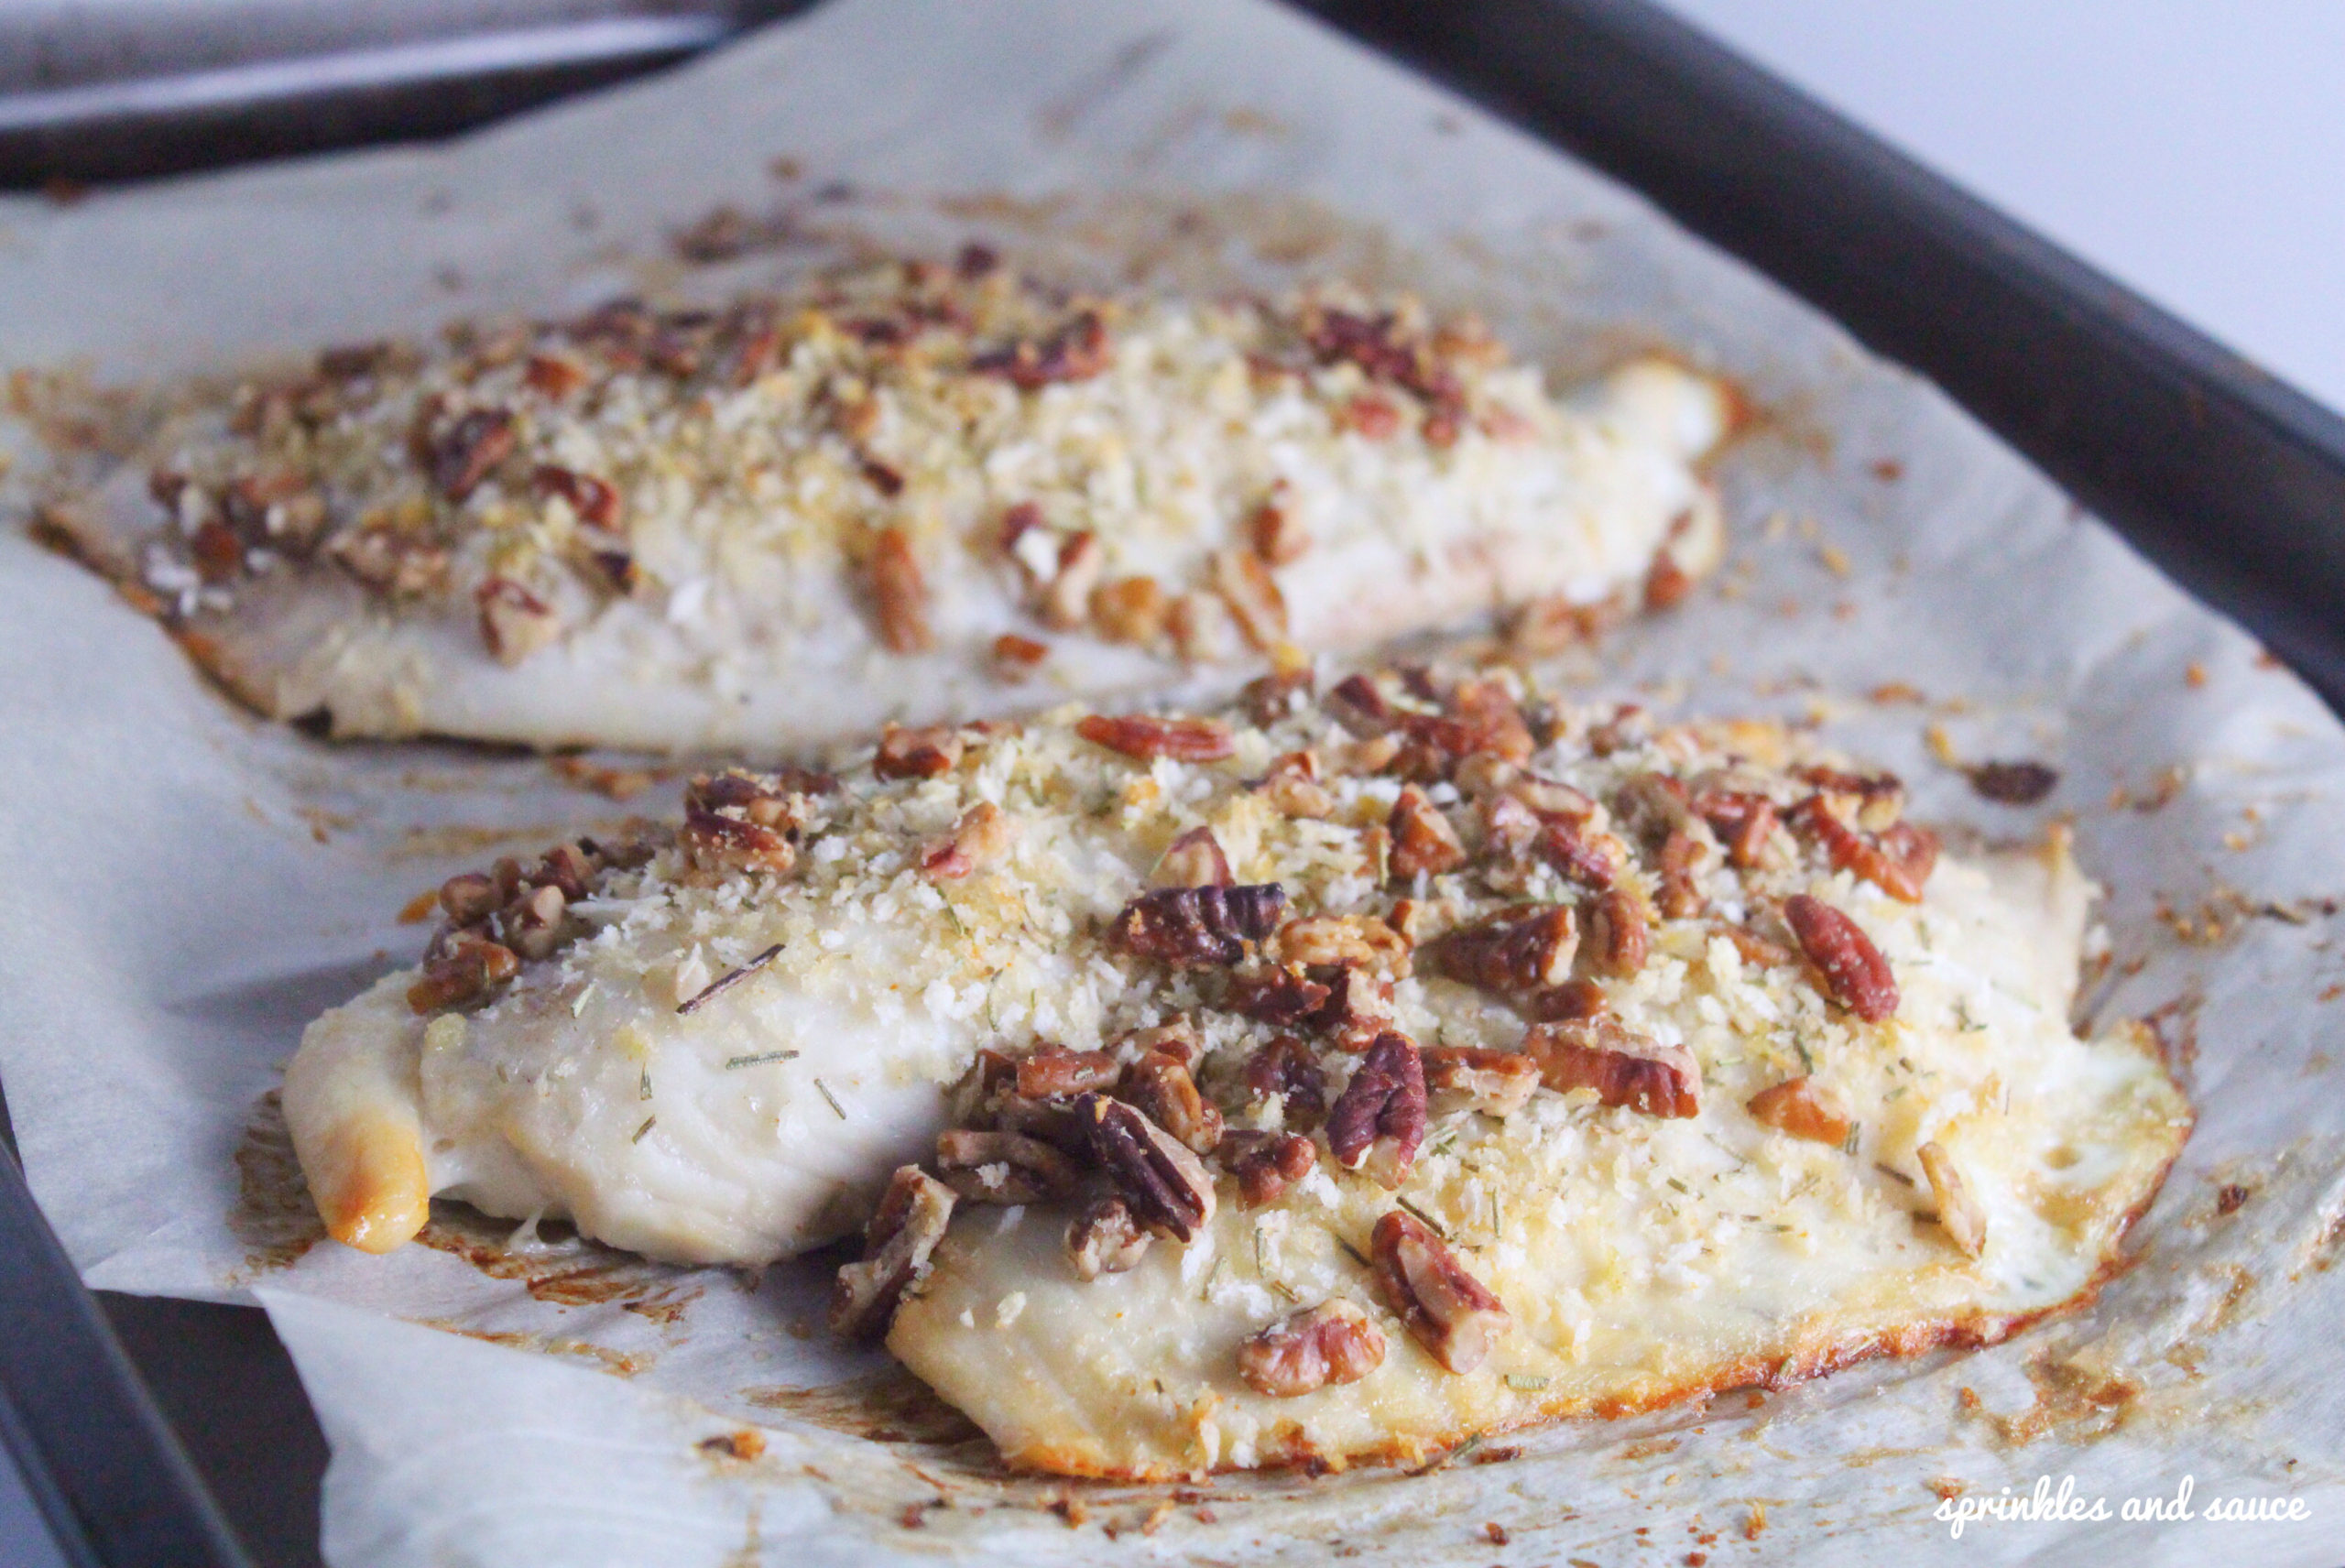 Baked Tilapia with Pecan Rosemary Topping